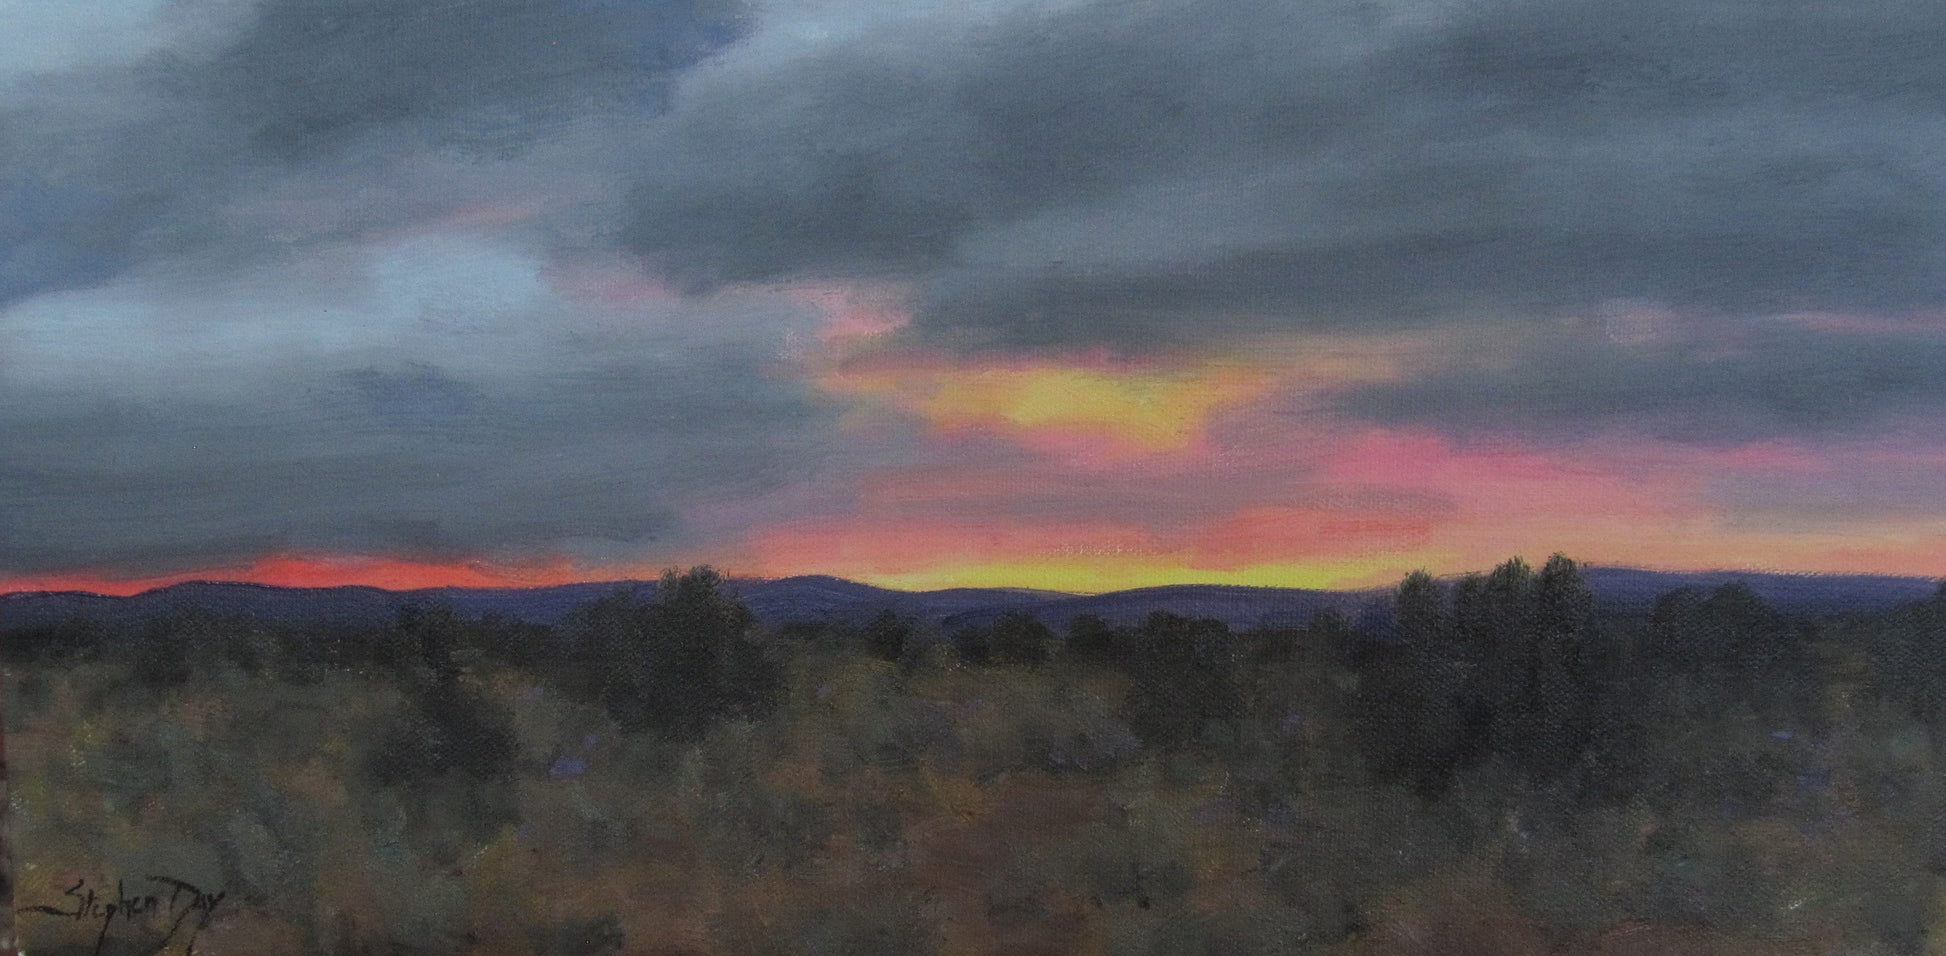 Evening's Final Moments-Painting-Stephen Day-Sorrel Sky Gallery